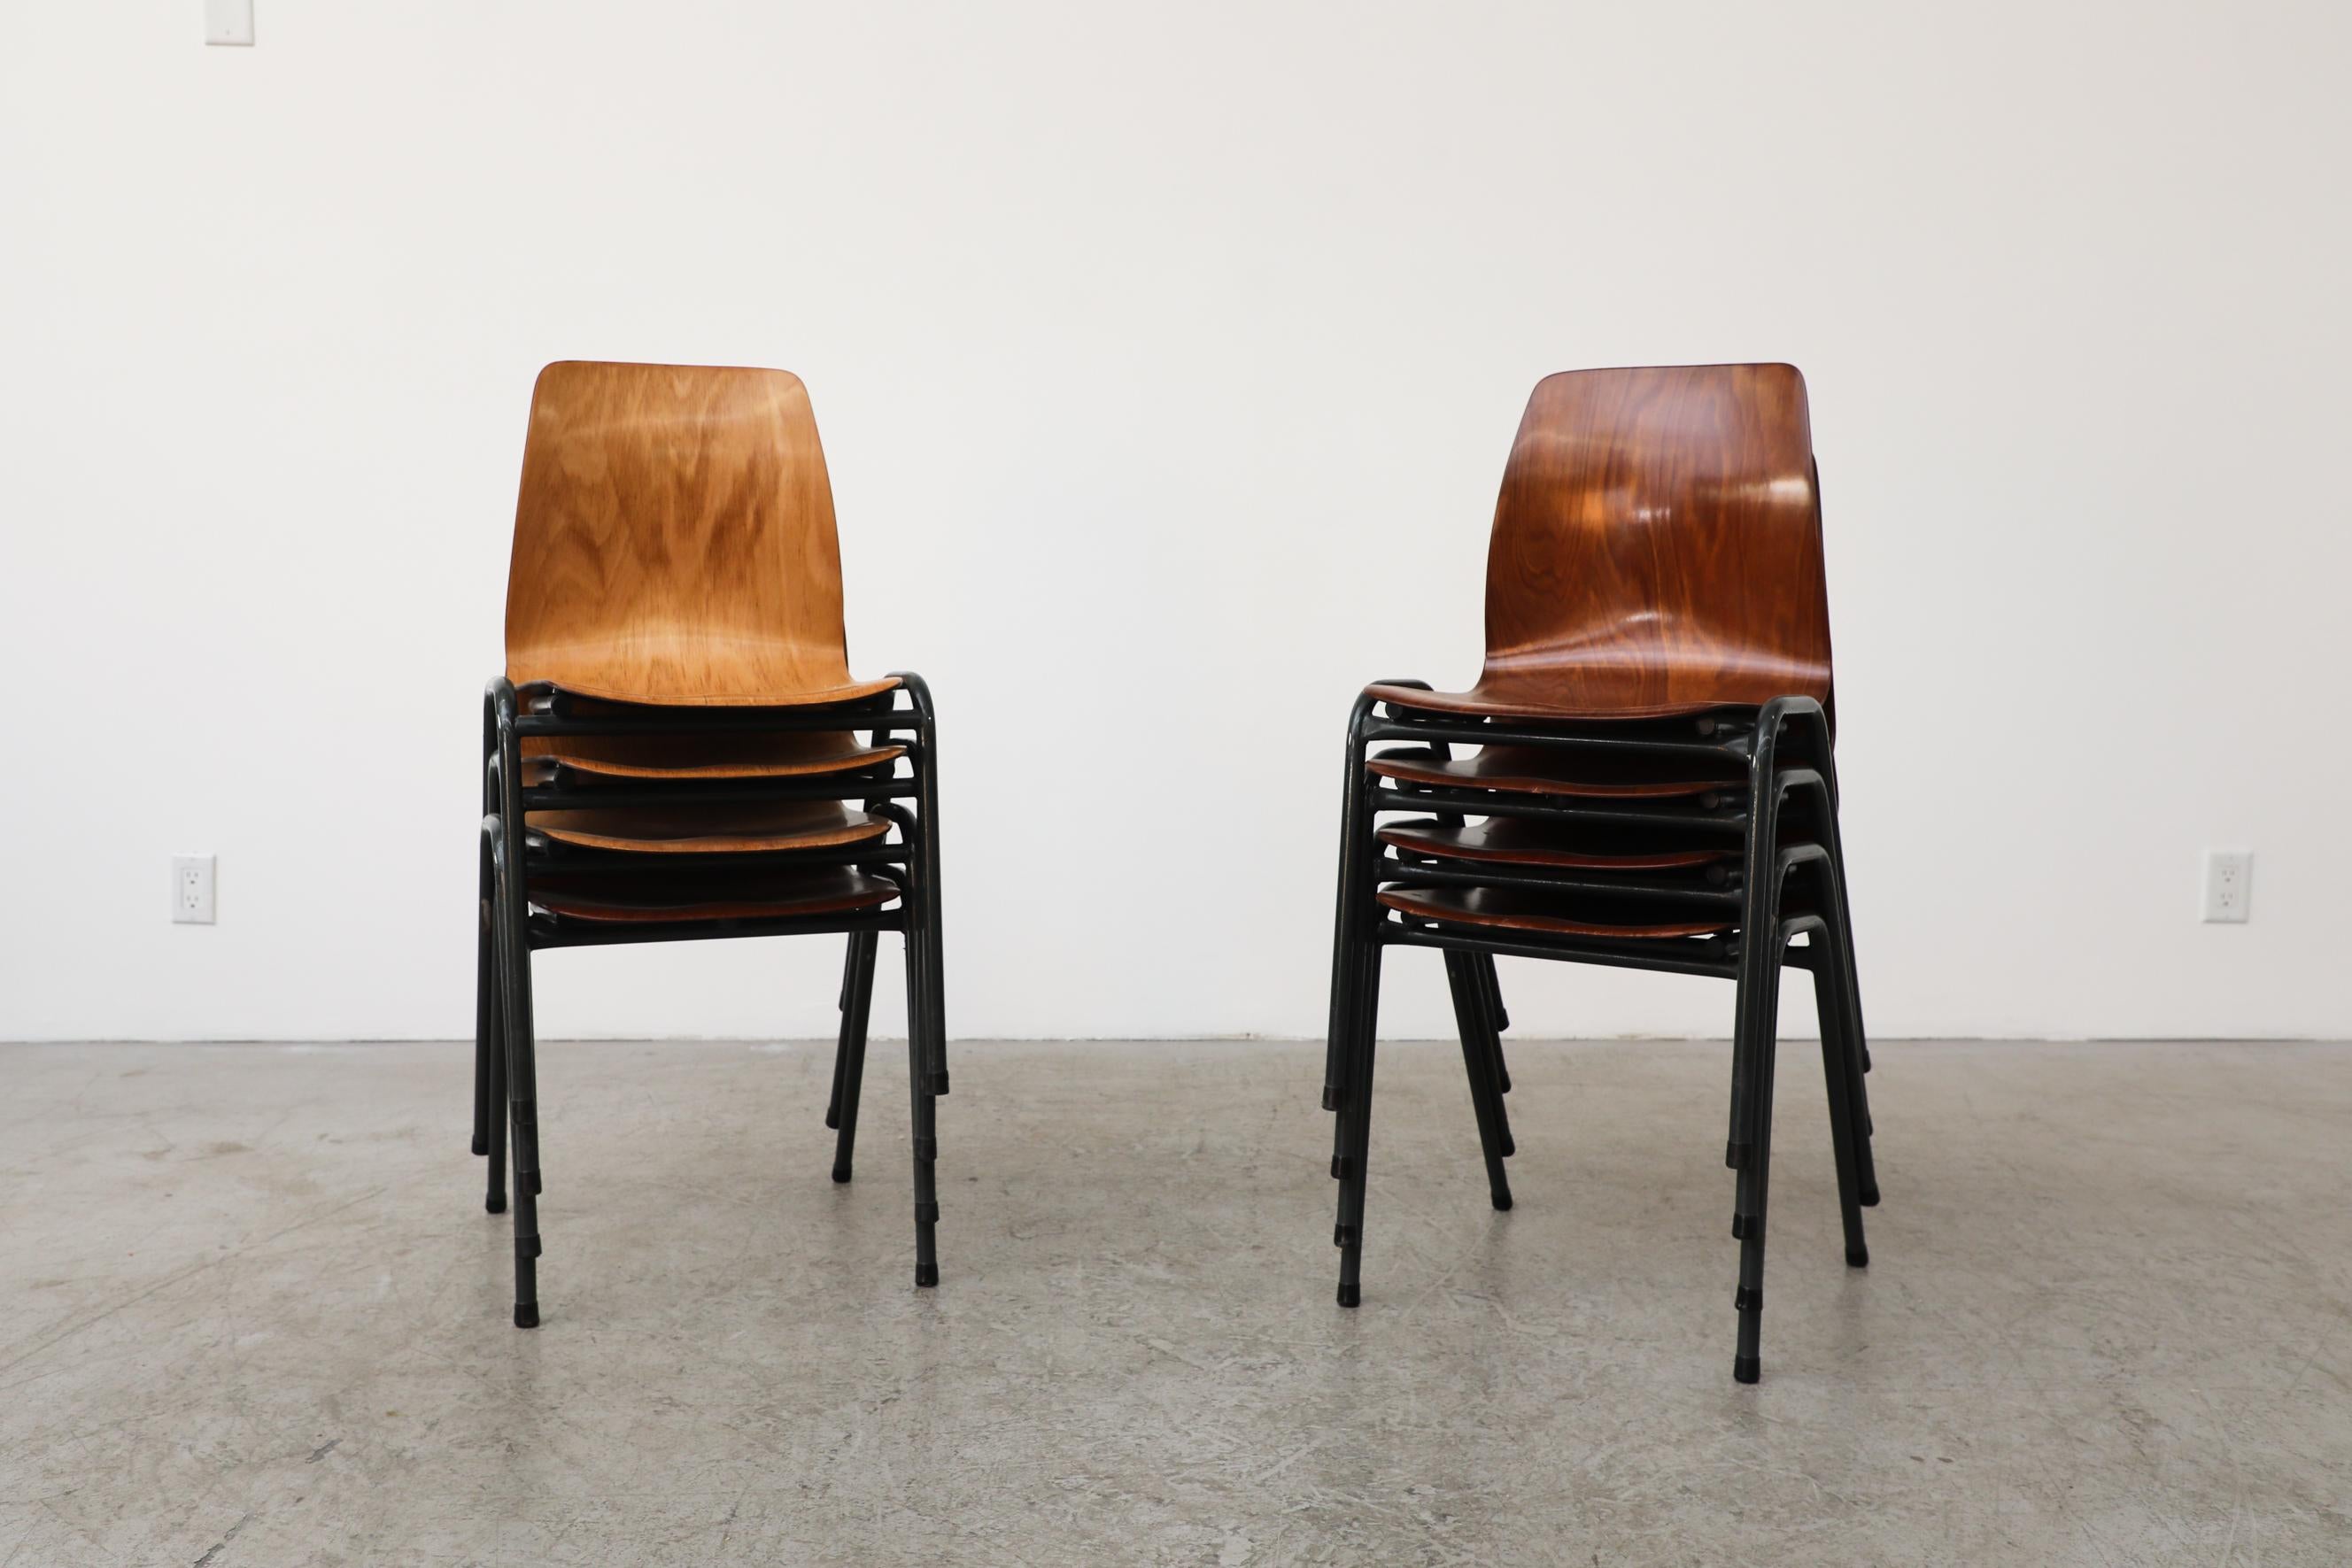 Set of 4 Dark Industrial Stacking Chair with Dark Toned Single Shell Seat In Good Condition For Sale In Los Angeles, CA